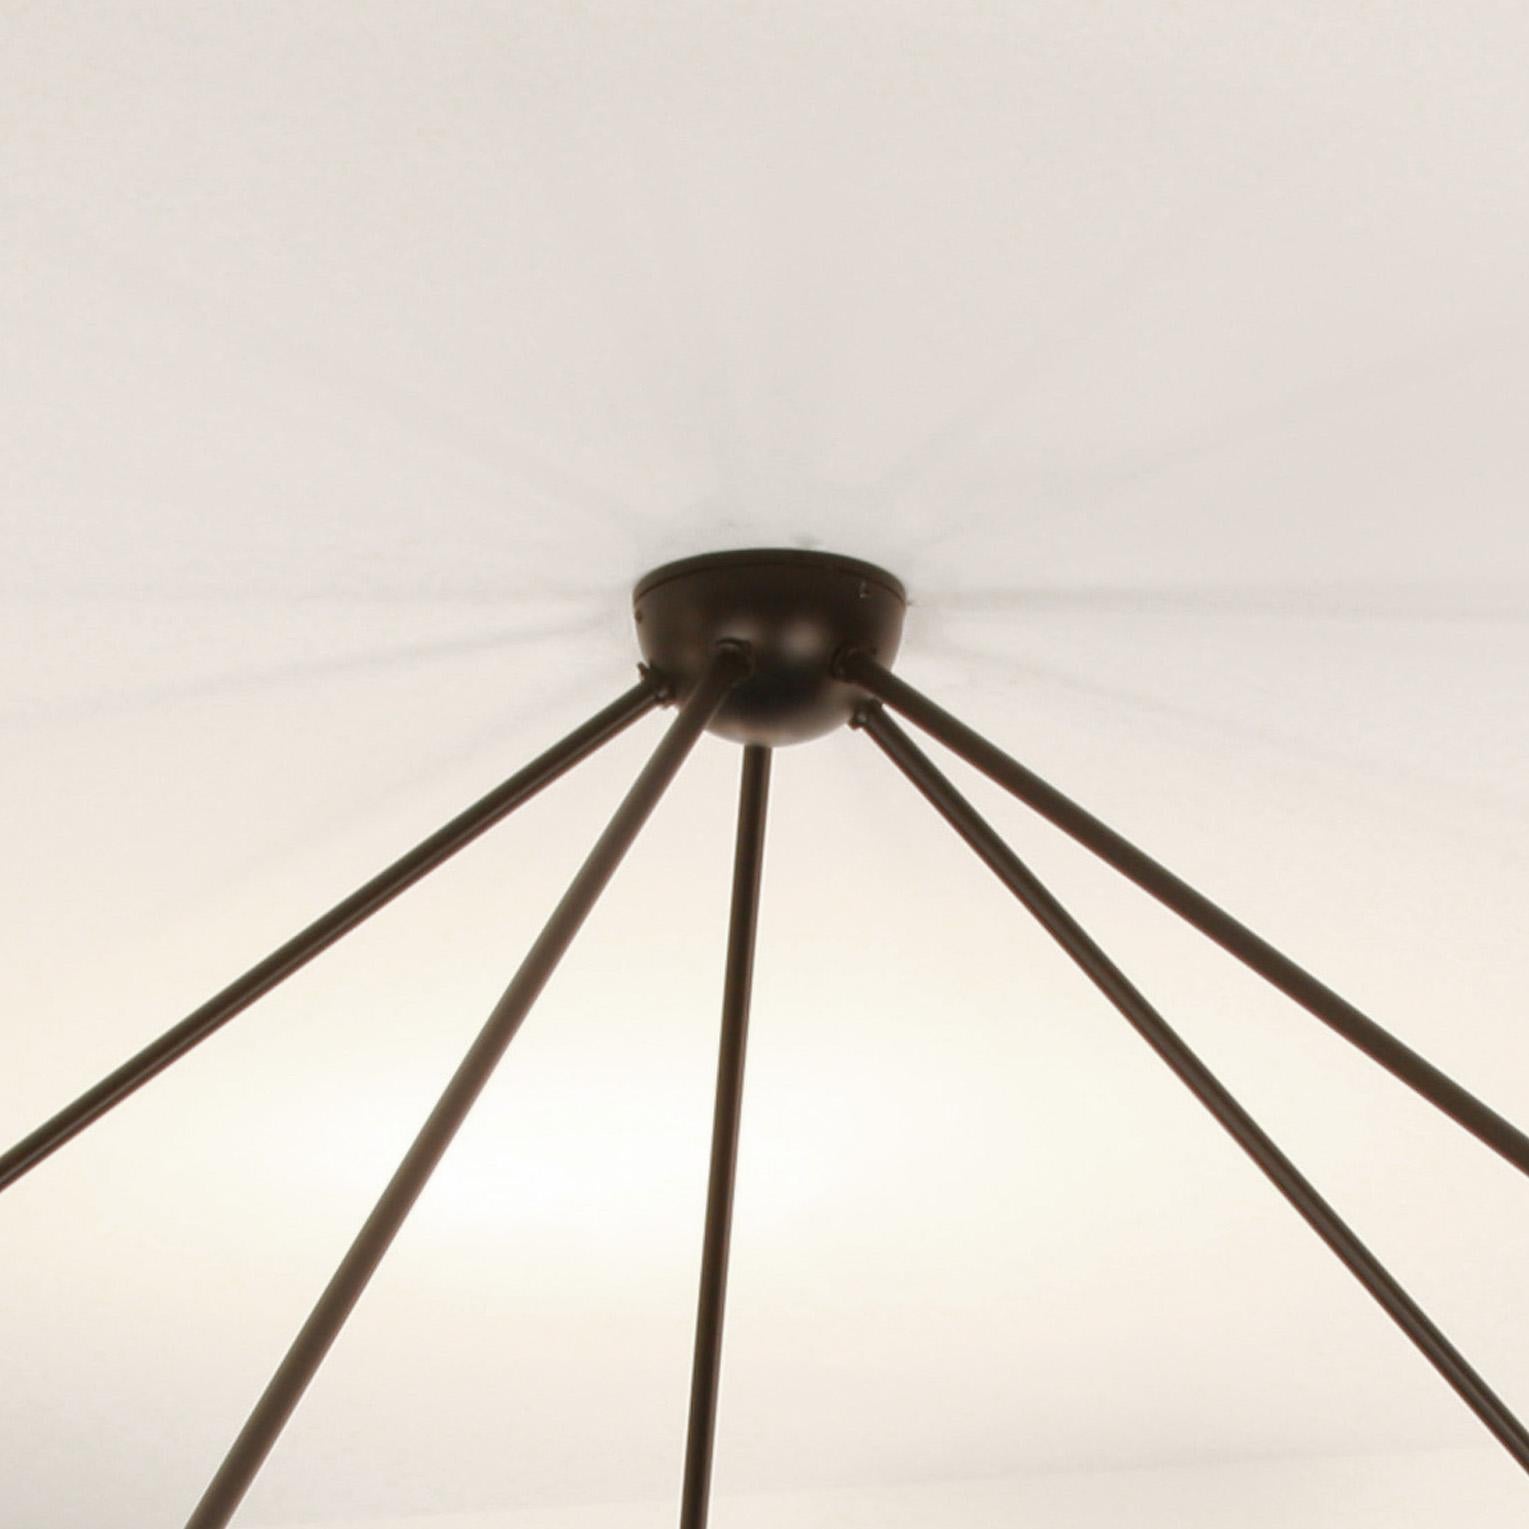 Contemporary Serge Mouille Mid-Century Modern Black Five Fixed Arms Spider Ceiling Lamp